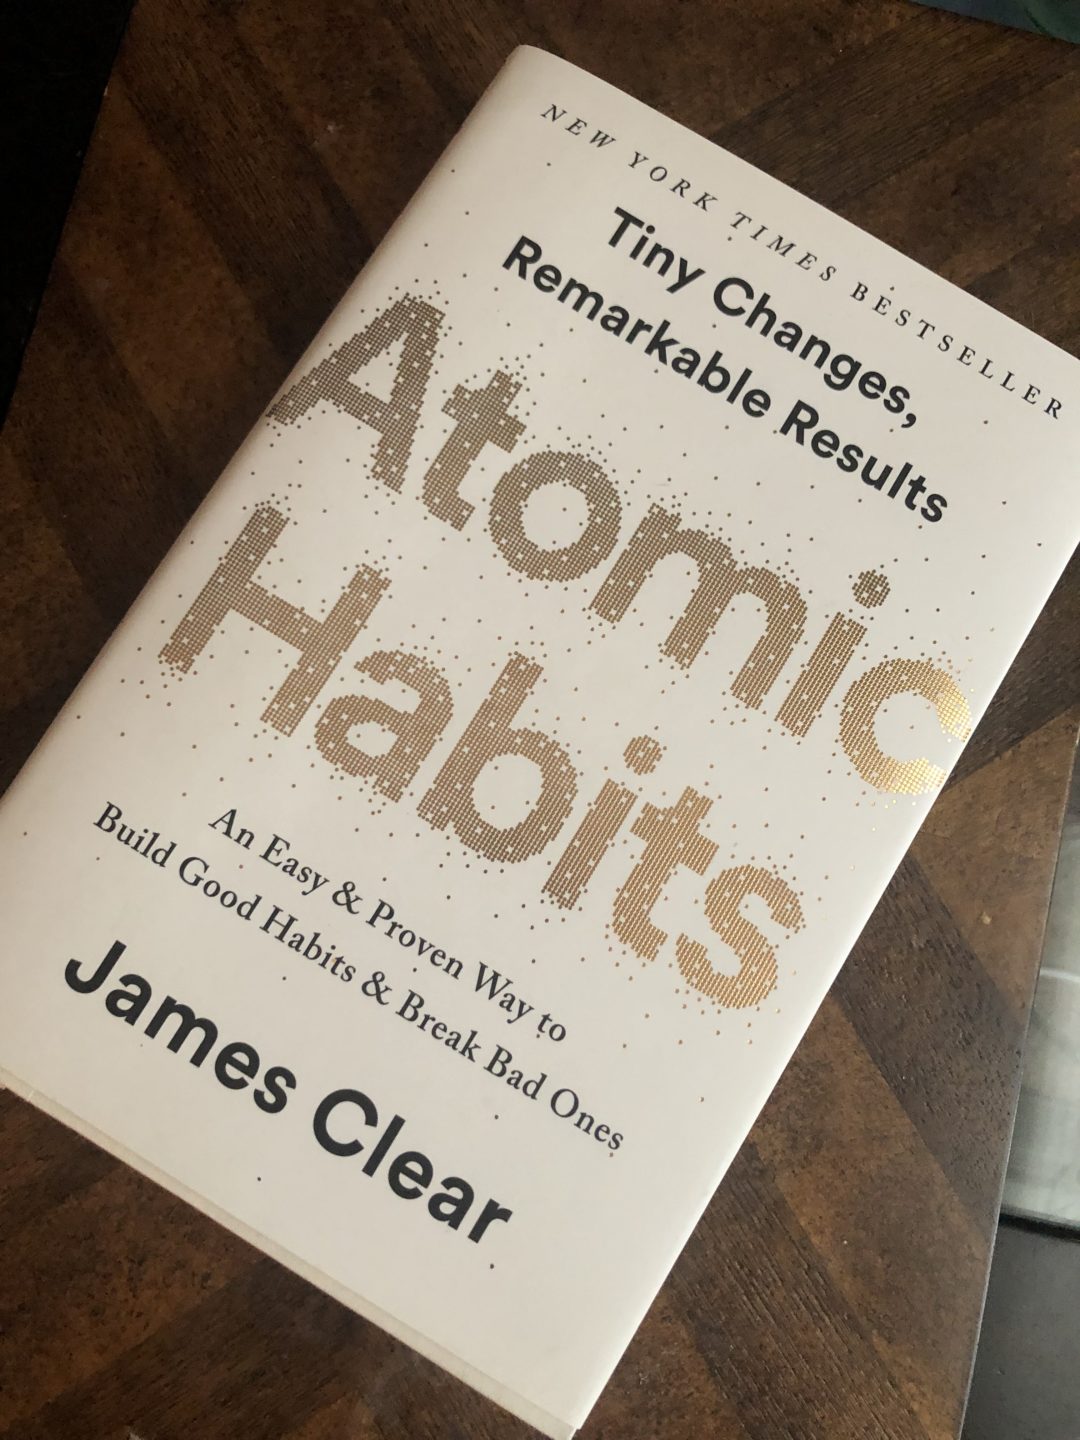 Atomic Habits instal the new for windows